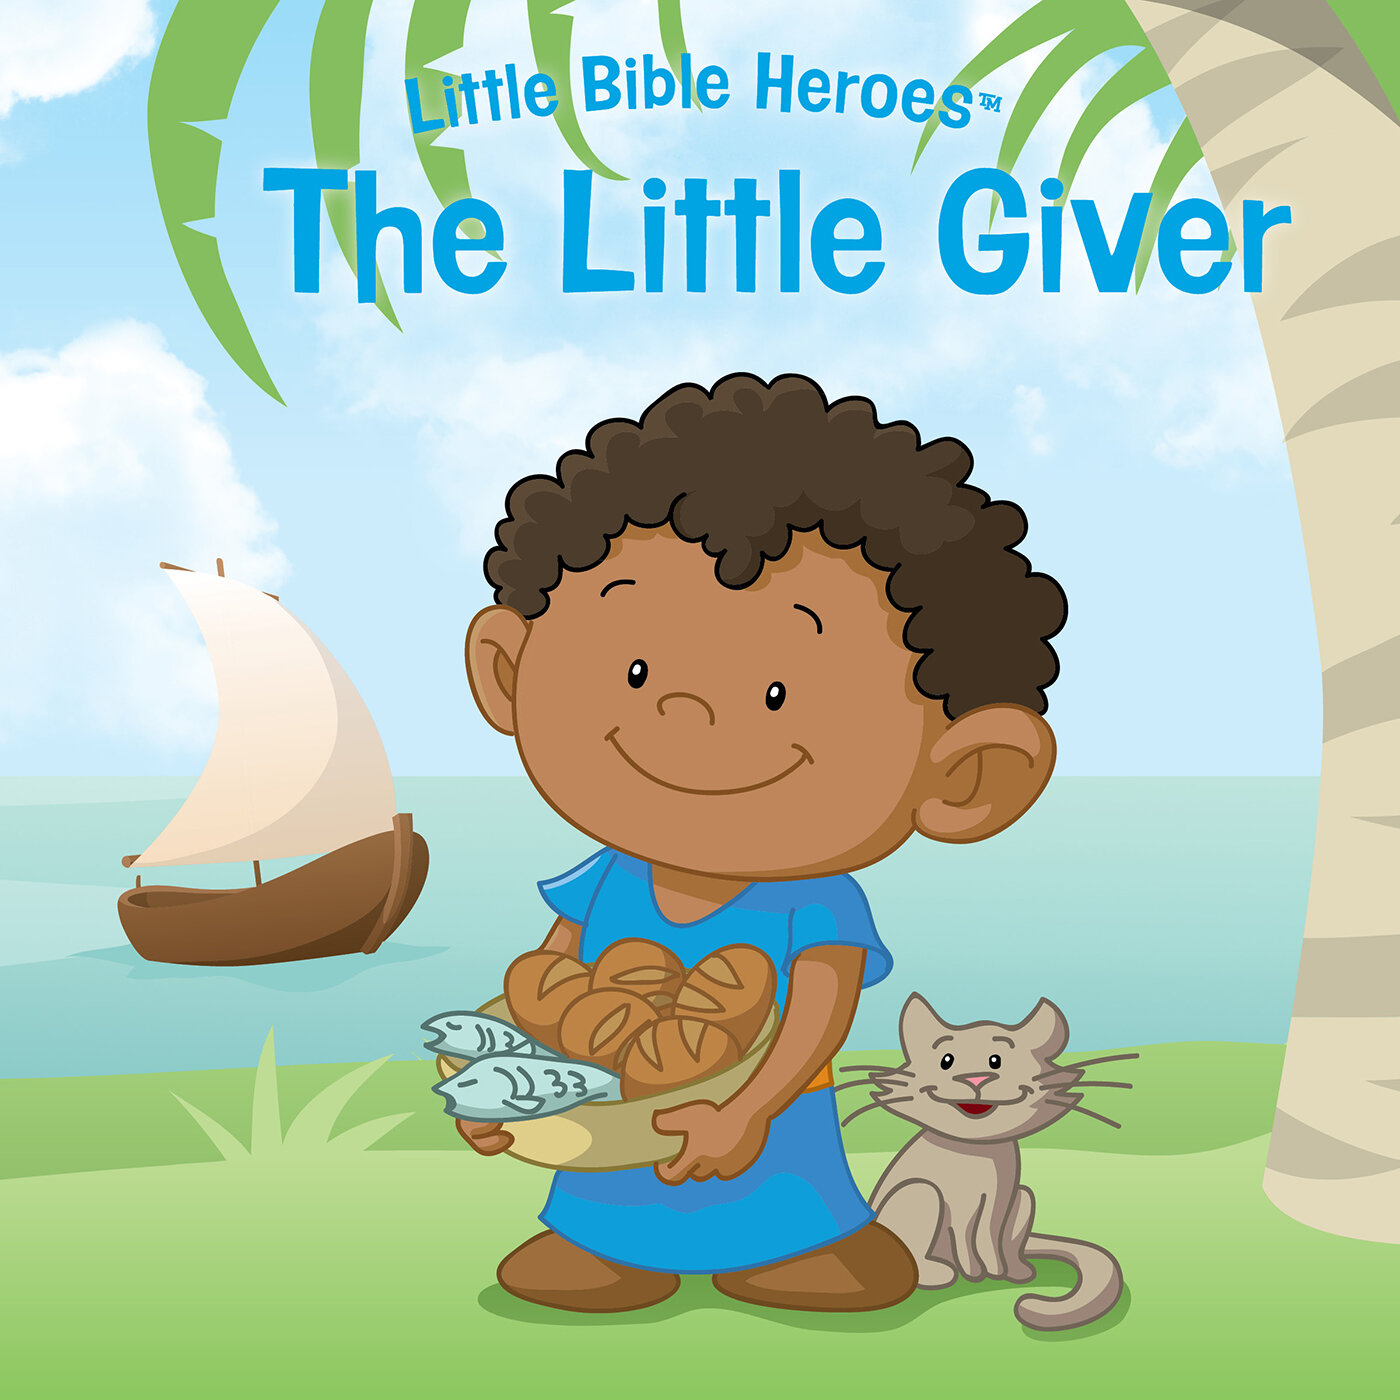 The Little Giver